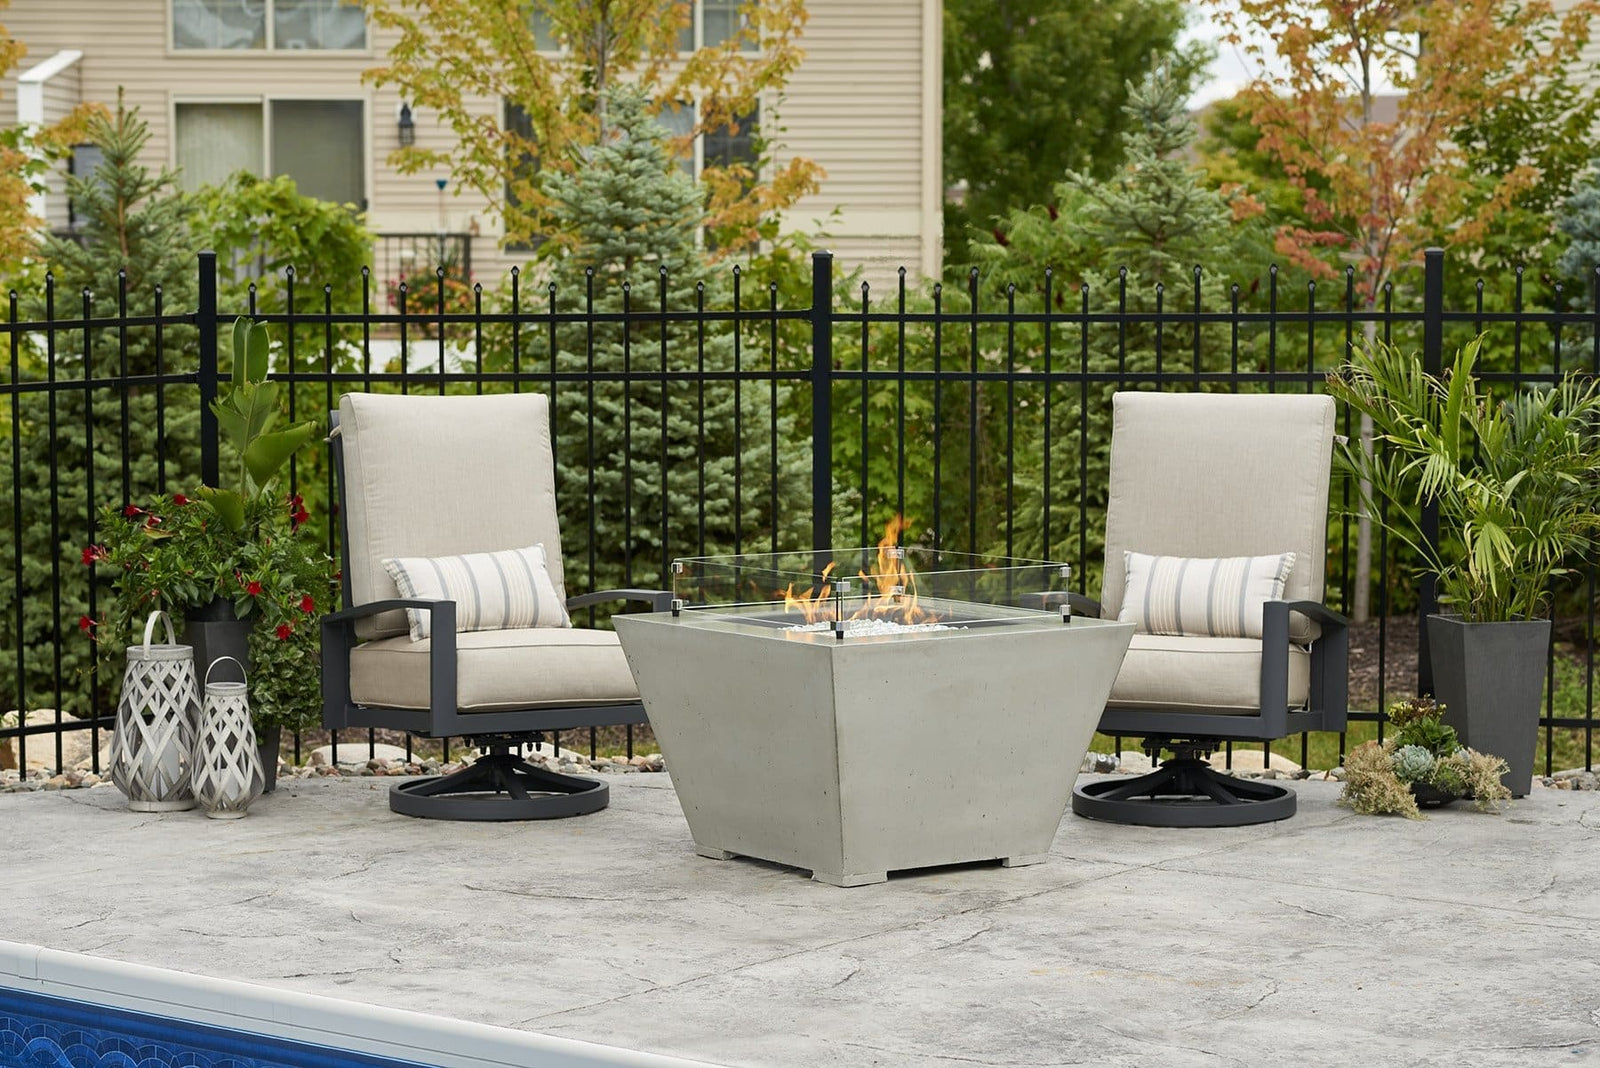 Two Fun Ways to Embrace Fall Weather Around Your Fire Table